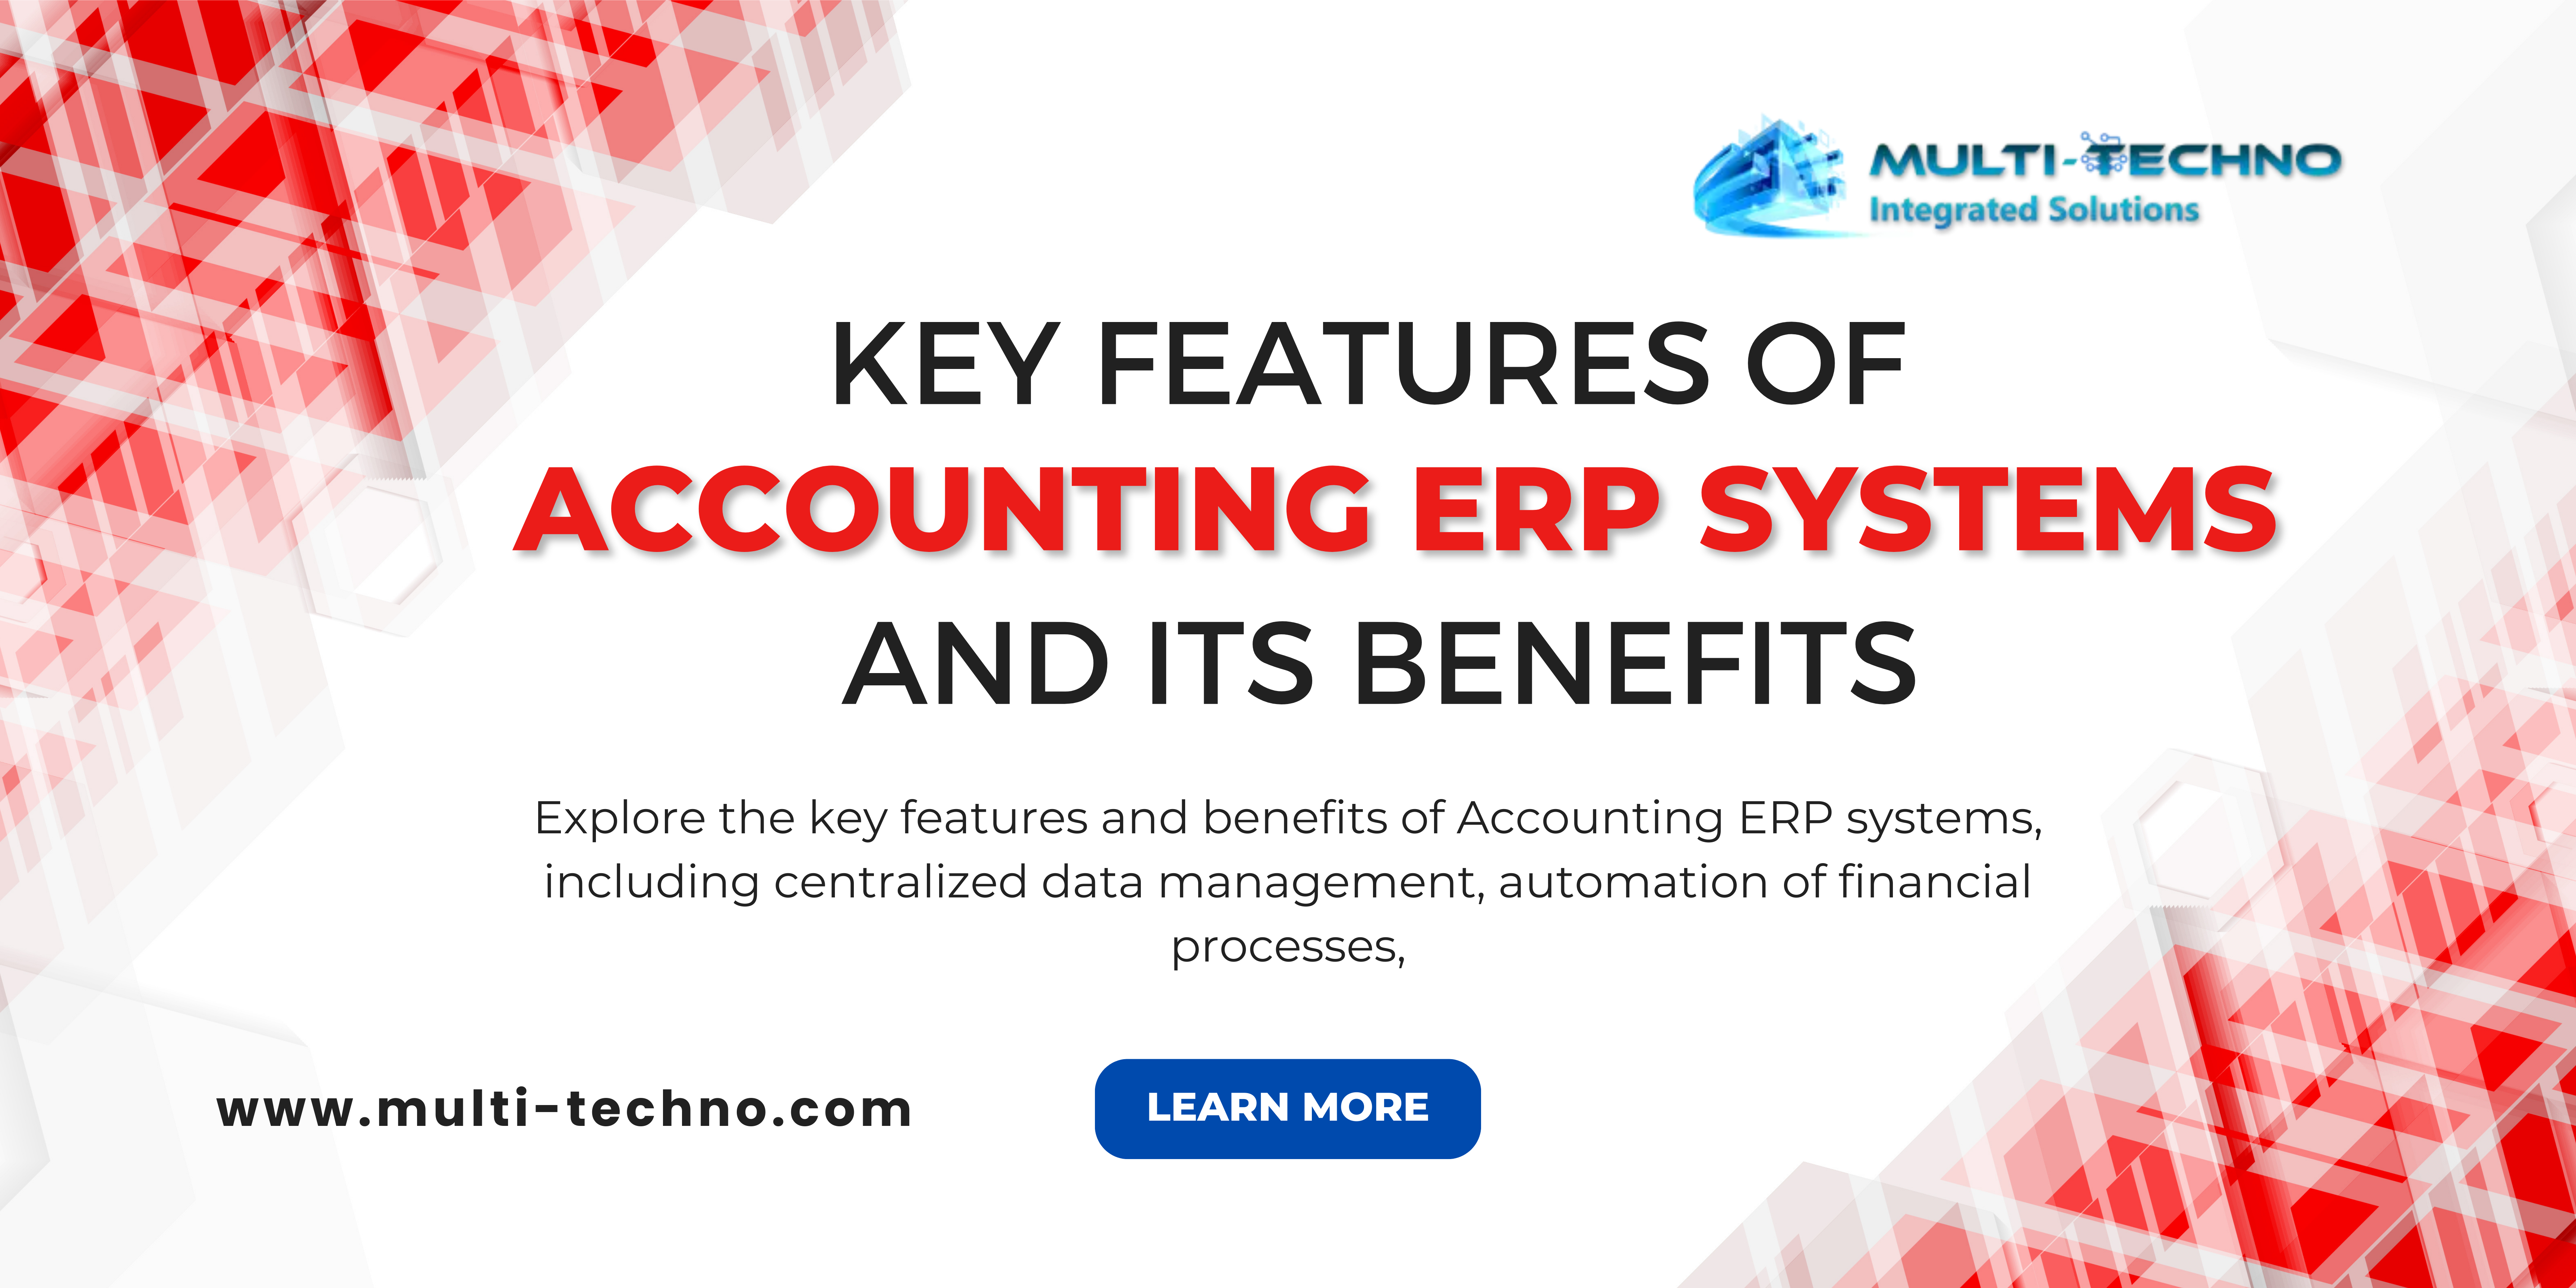 Key Features of Accounting ERP Systems and its Benefits - Multi-Techno